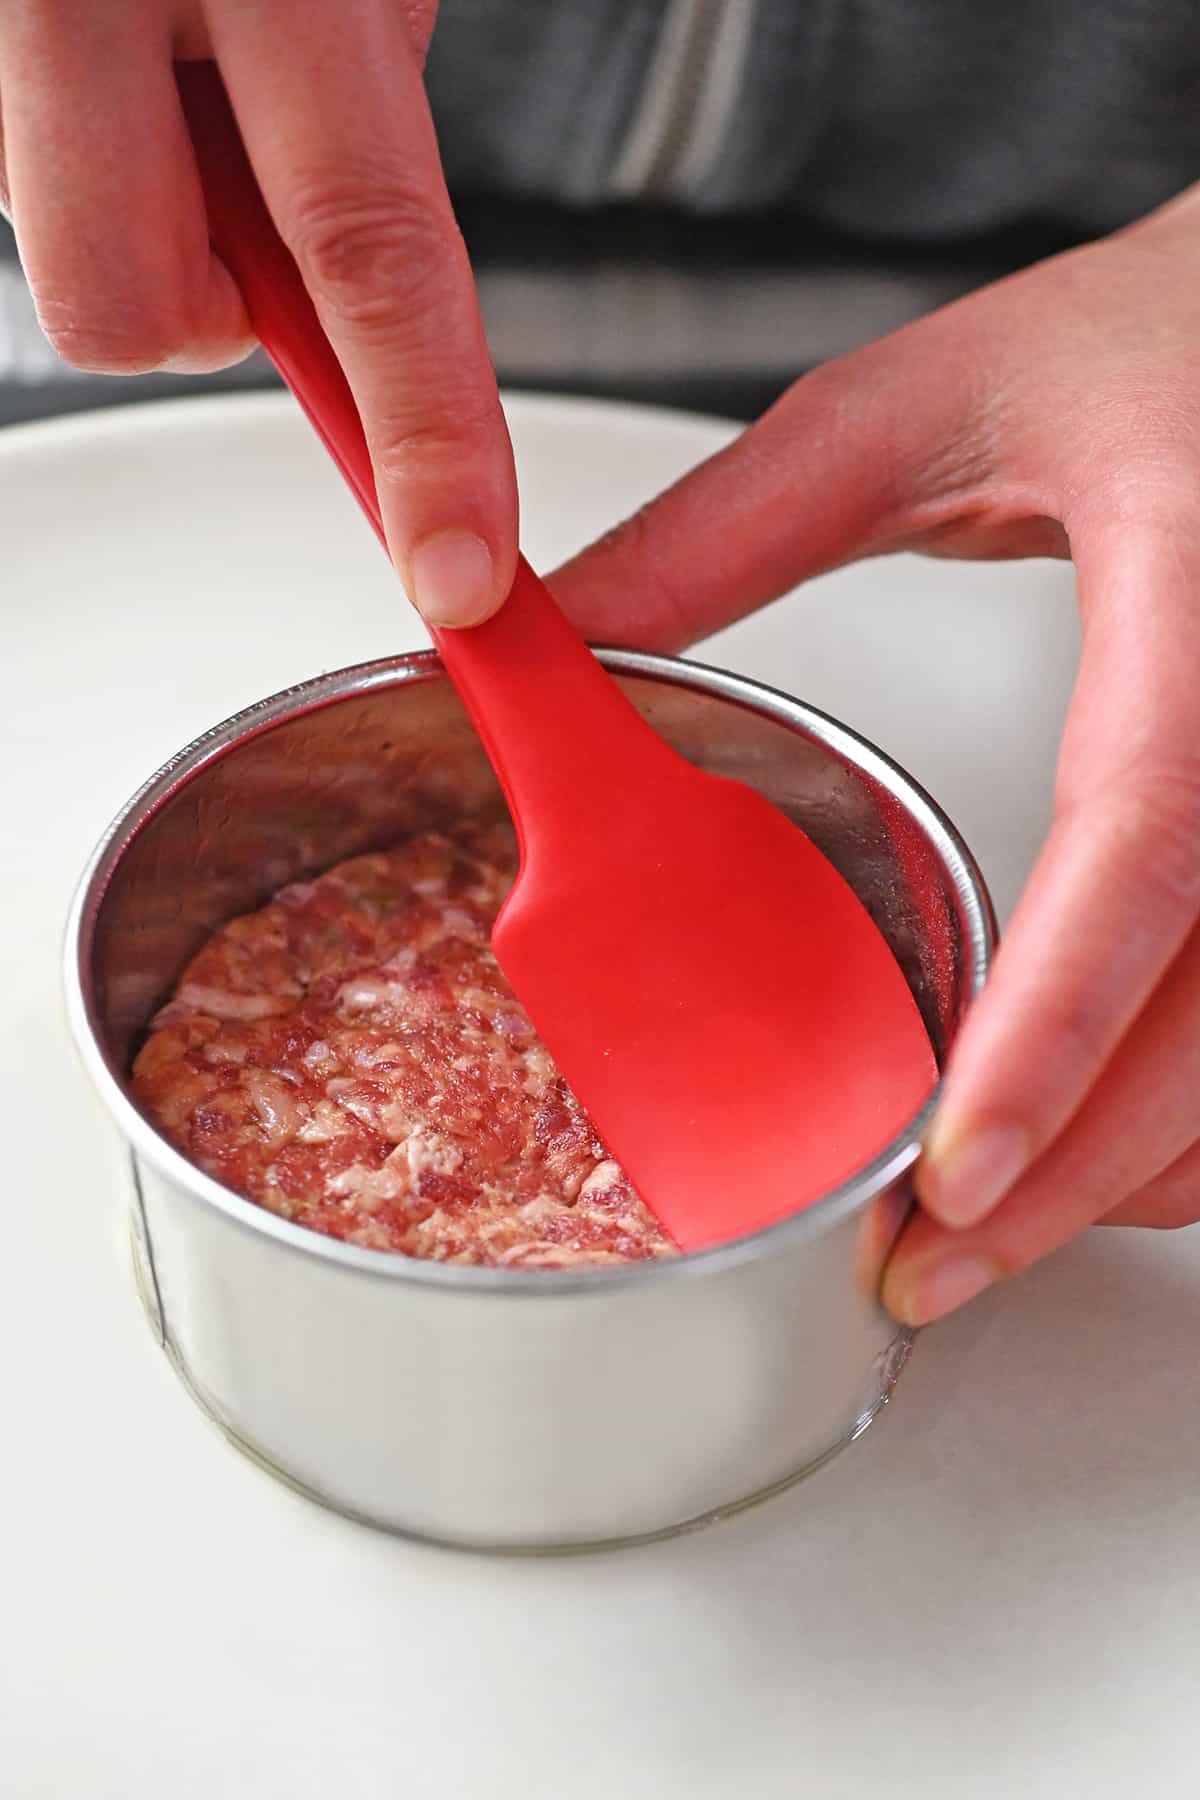 A red spatula is pressing raw bulk sausage into a stainless steel round biscuit mold.